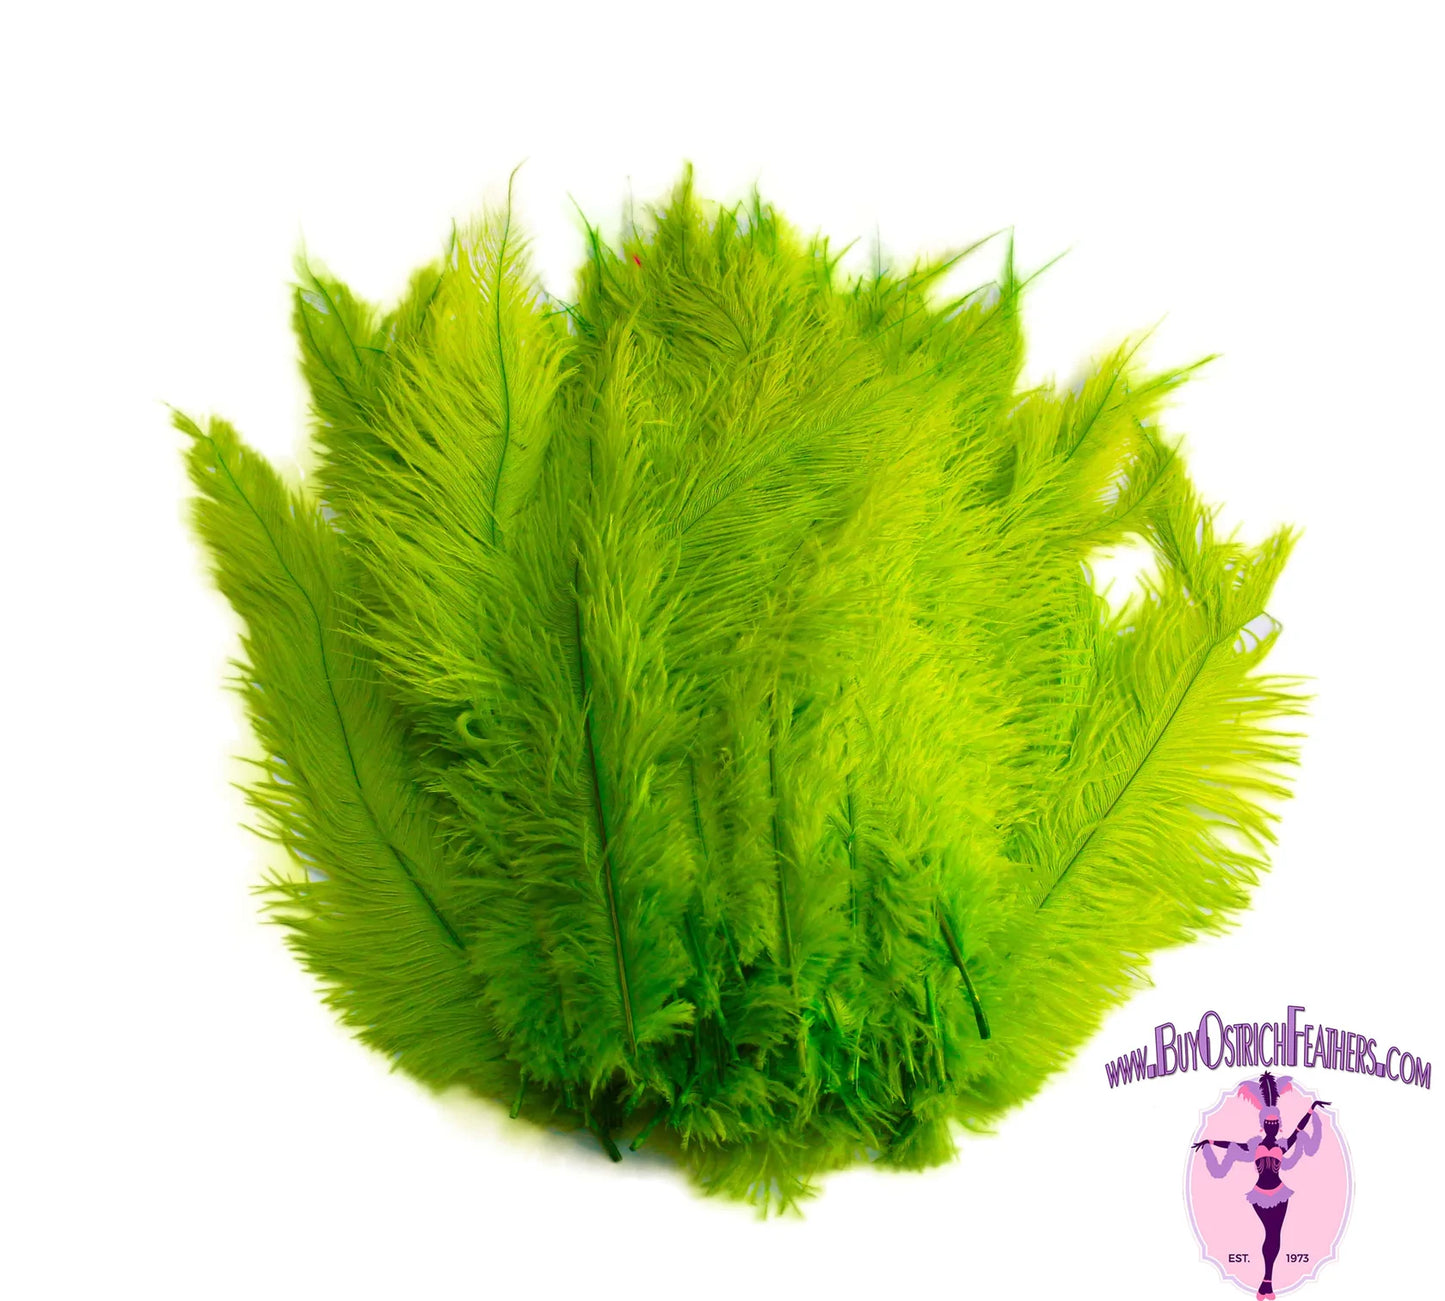 Ostrich Feather Rental 16-20" (Lime Green) - 250pcs - Buy Ostrich Feathers